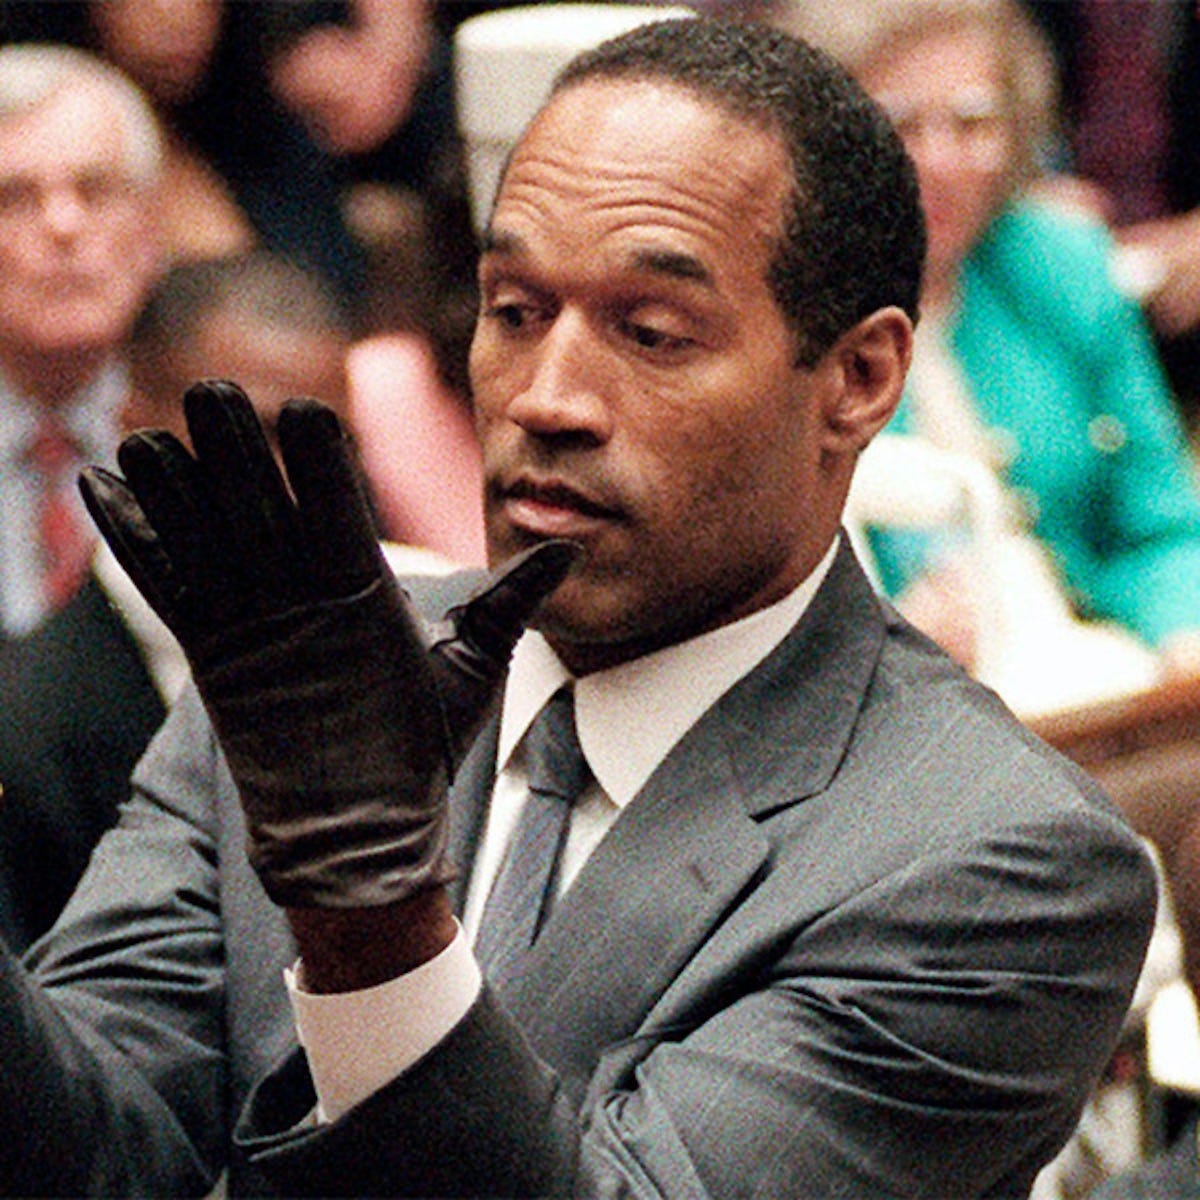 25 Bizarre Things You Forgot About the O.J. Simpson Murder Trial - E! Online